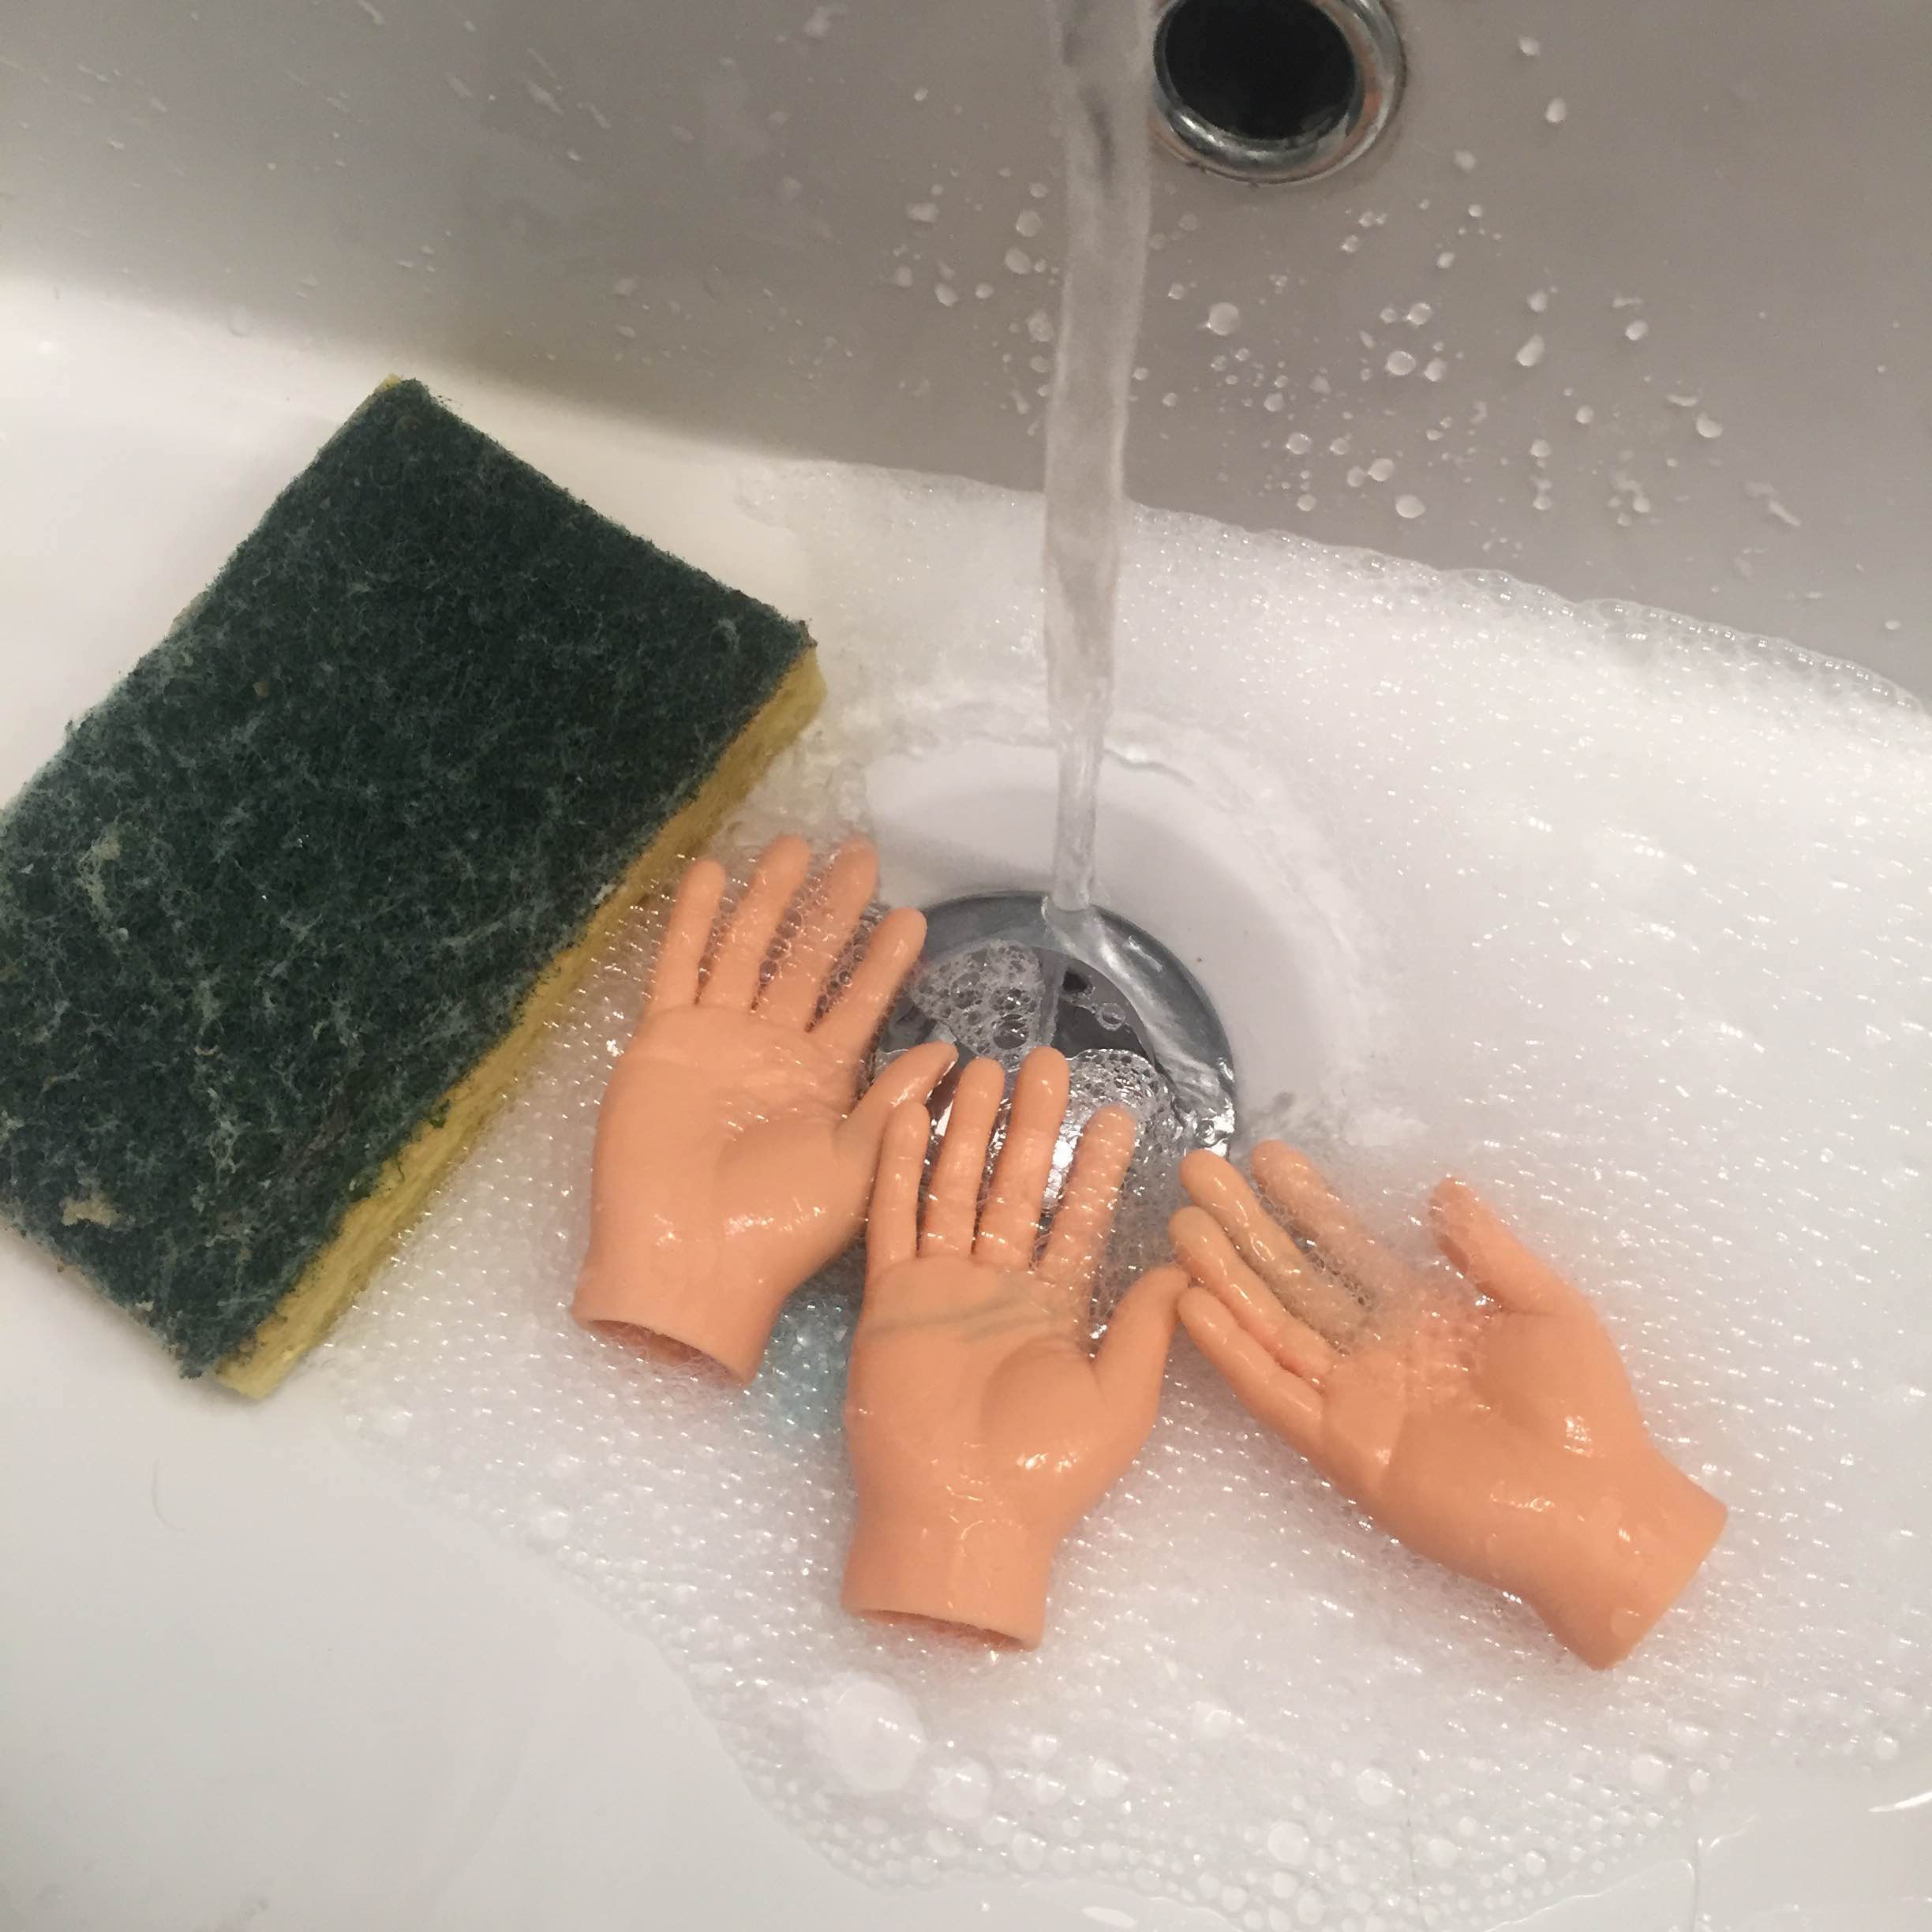 hands are washing